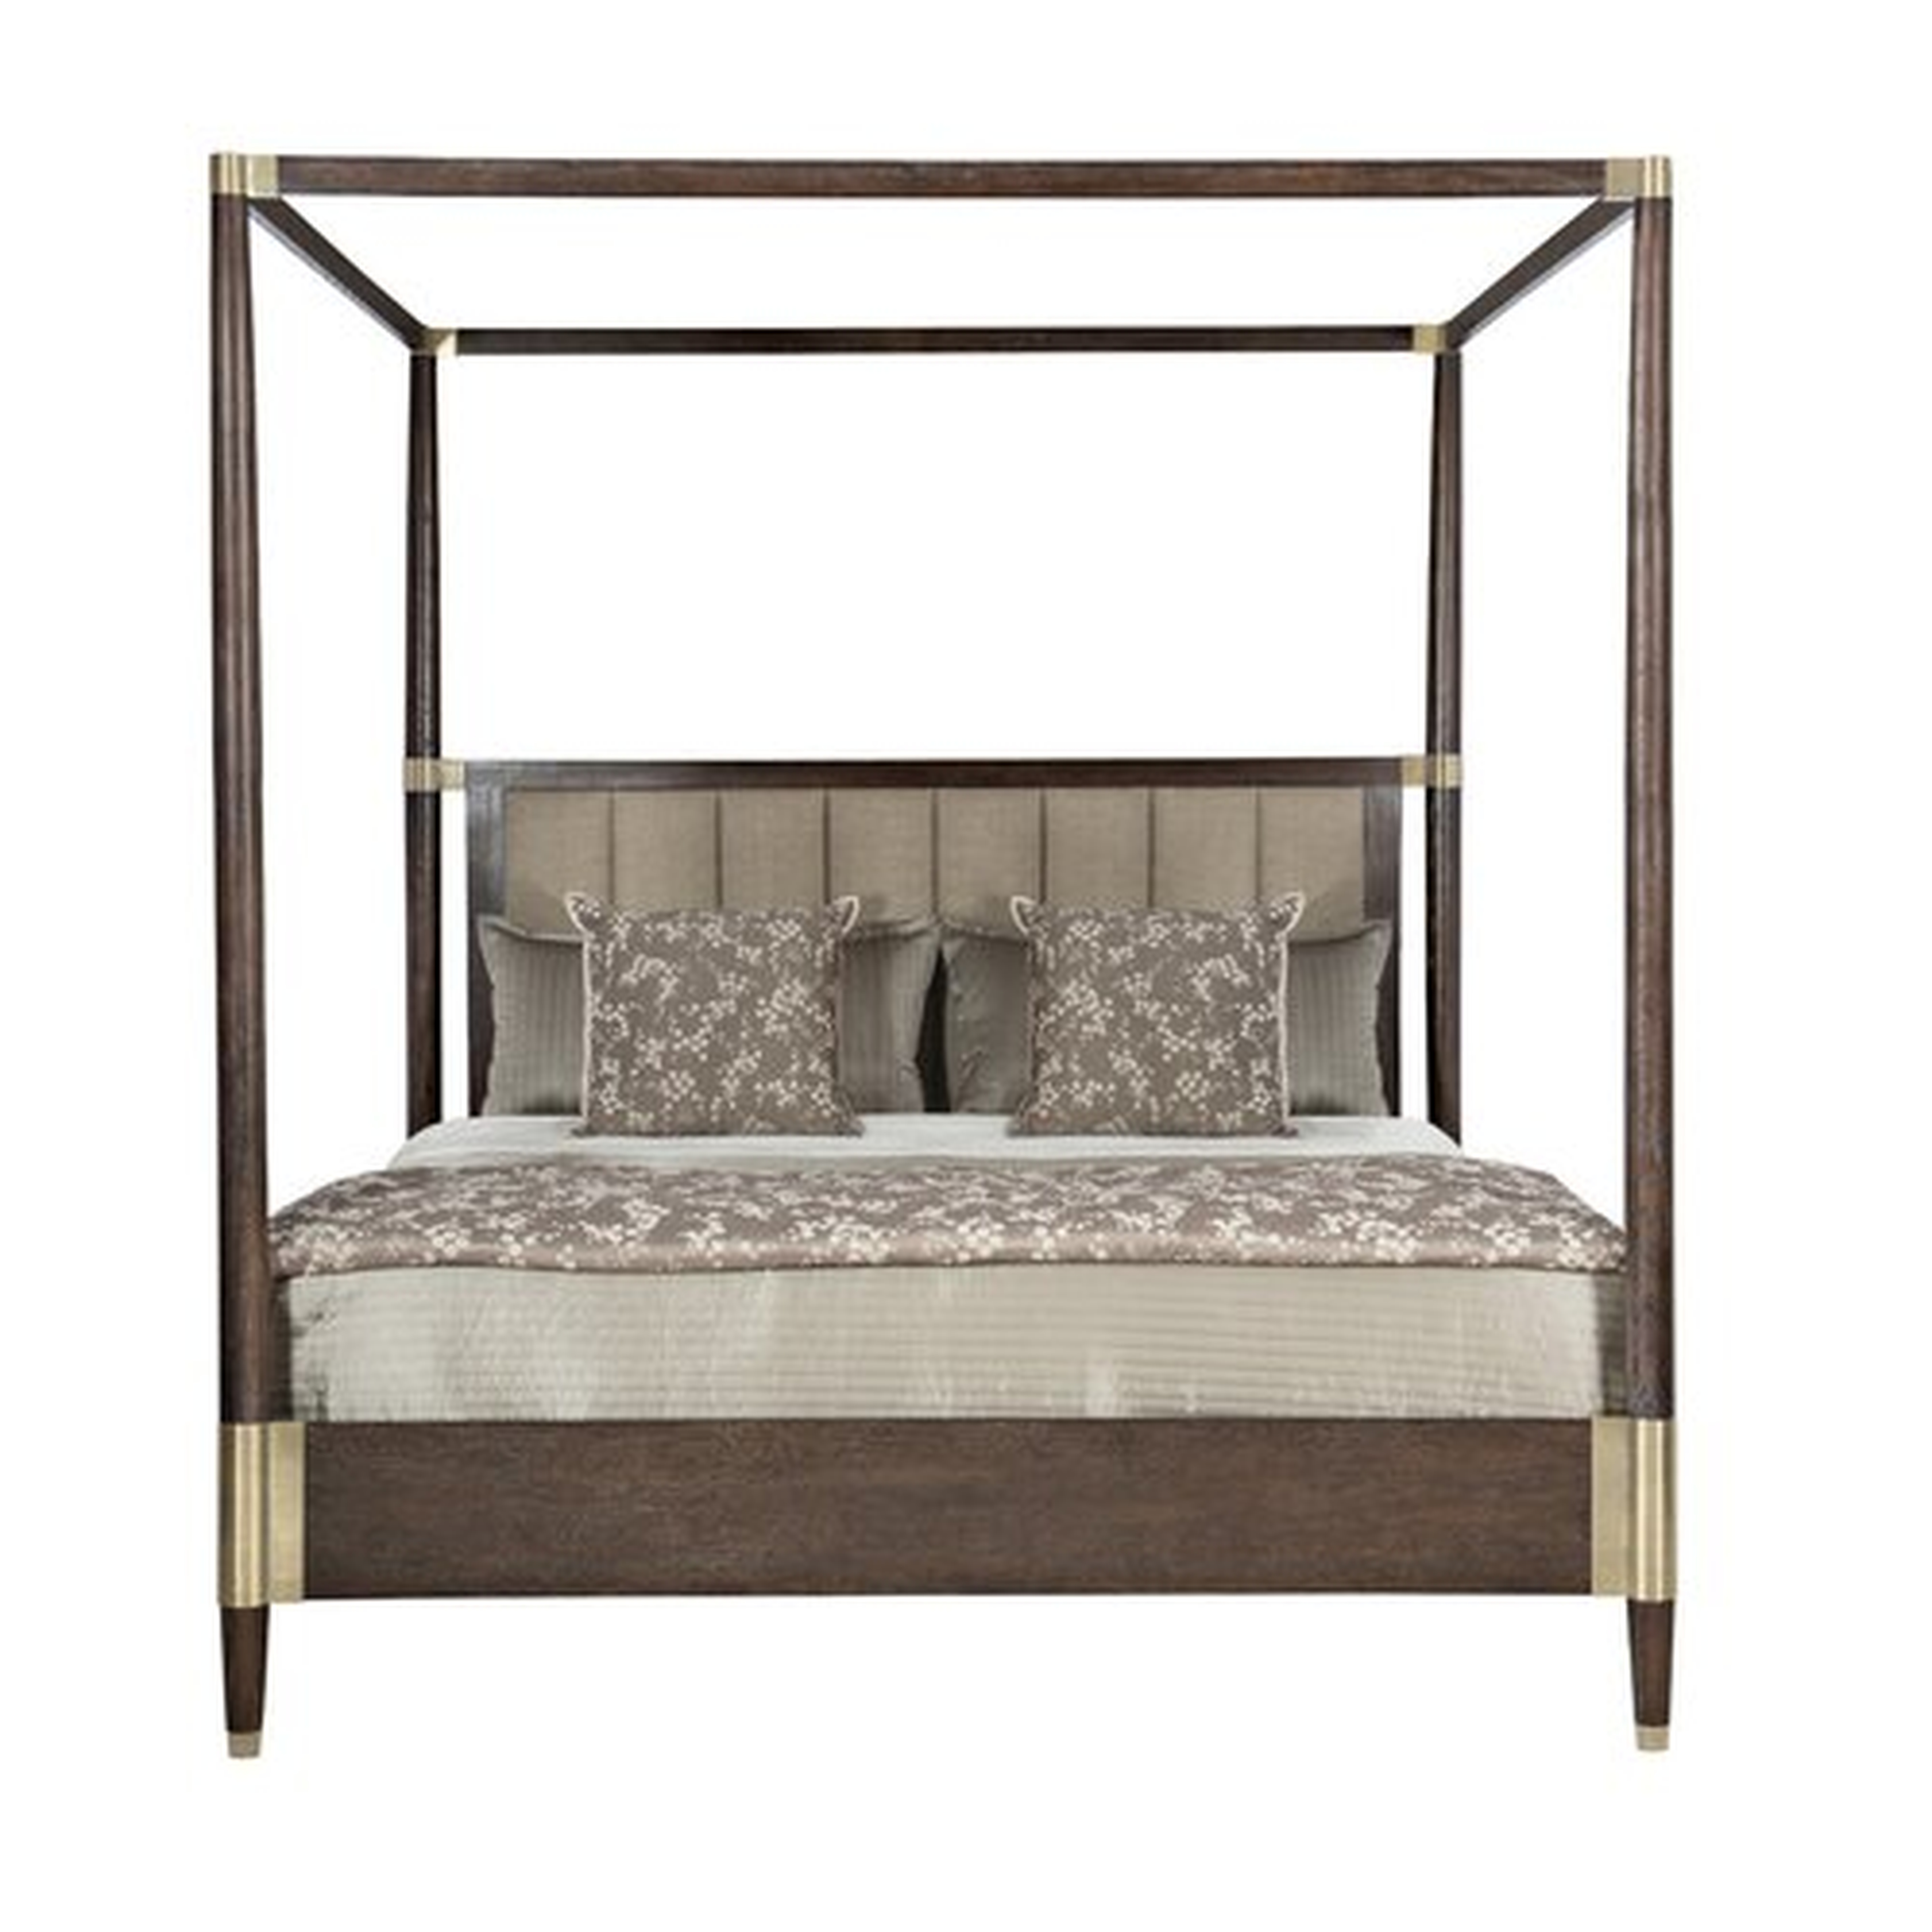 CLAREDON UPHOLSTERED CANOPY BED - Perigold